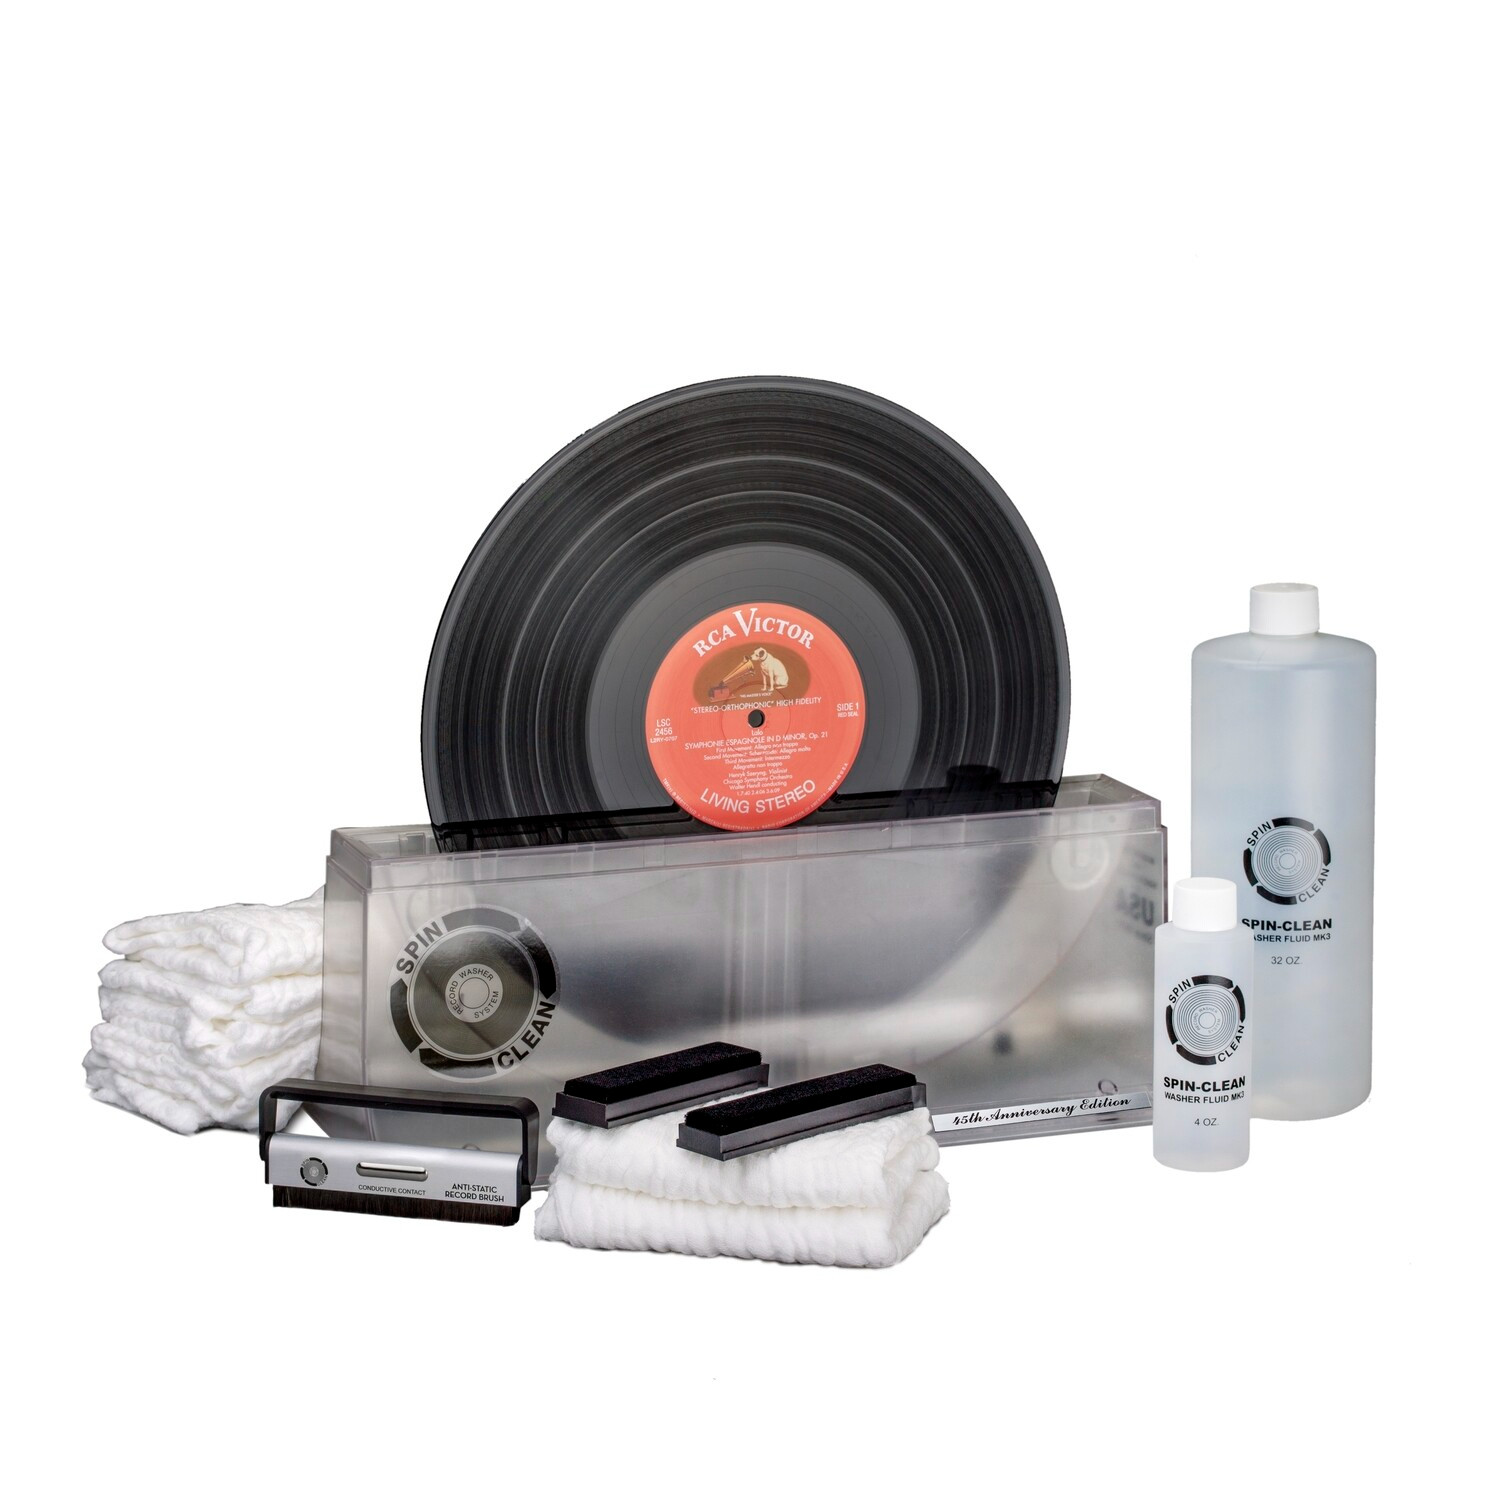 Pro-Ject Spin-Clean Record Washer MKII "Clear" Deluxe Kit - Limited Edition - зображення 1